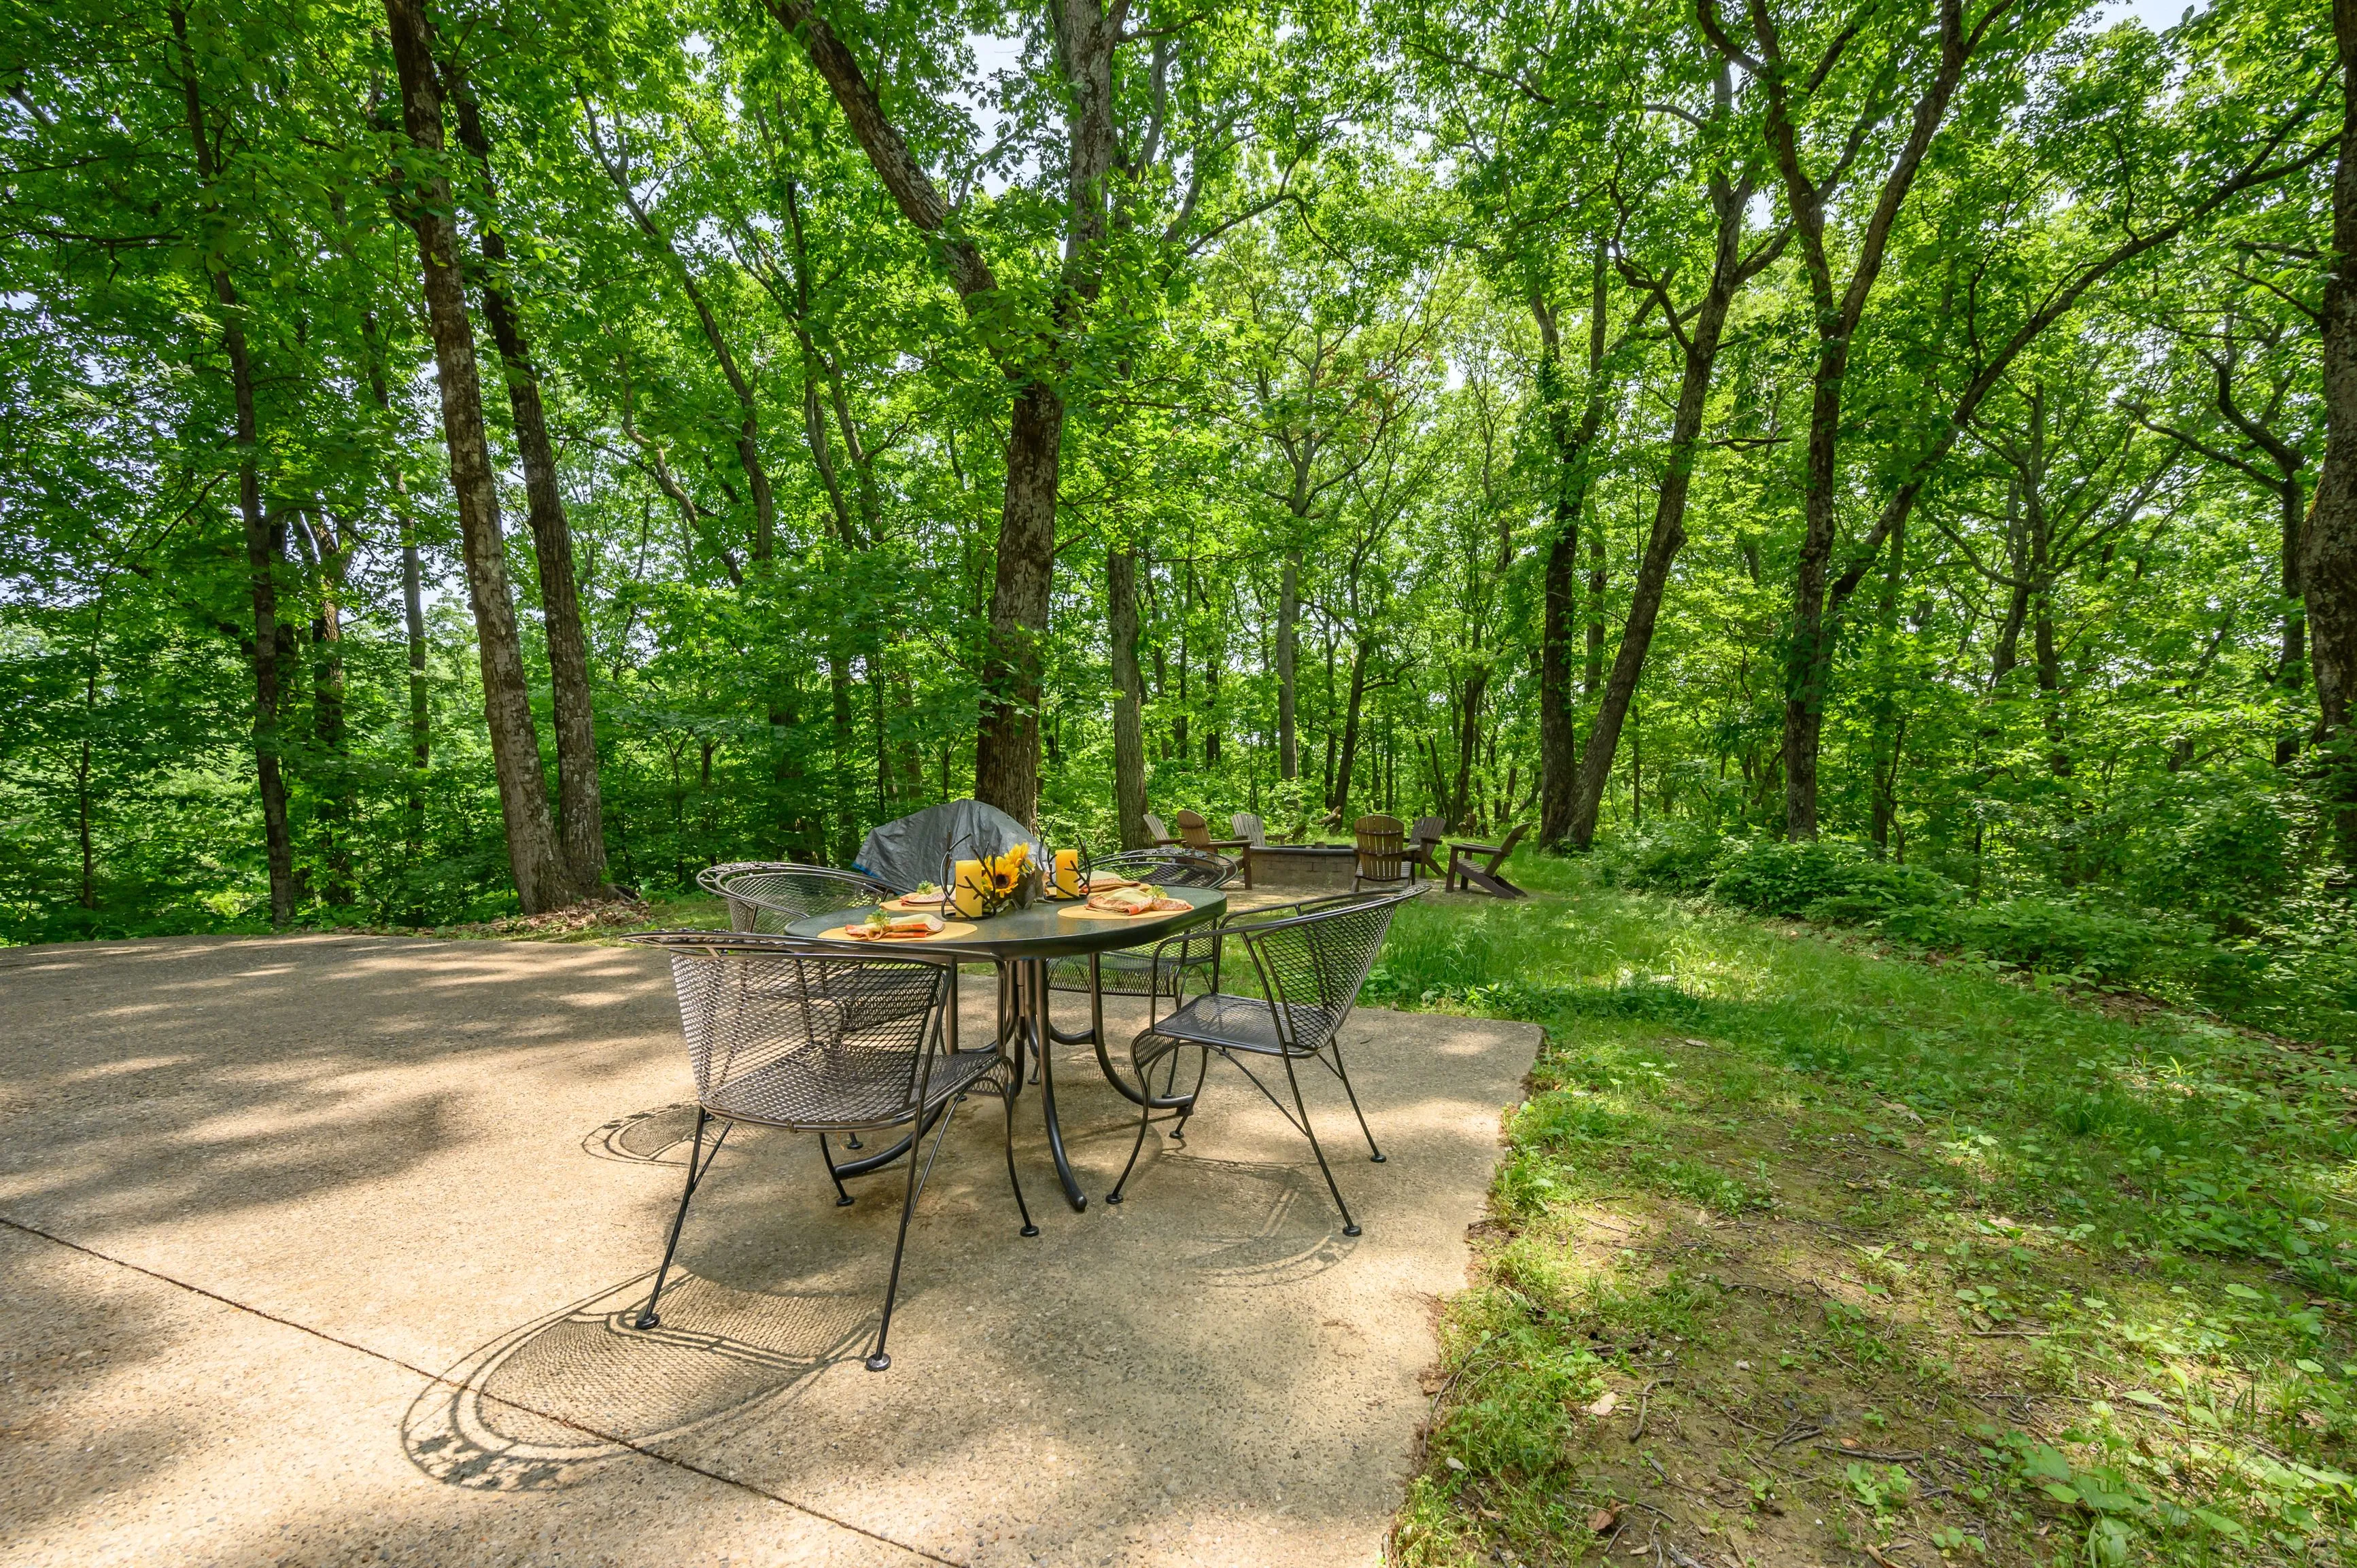 Patio dining set on a concrete slab in the woods with a table set with food and drinks, surrounded by lush green trees.